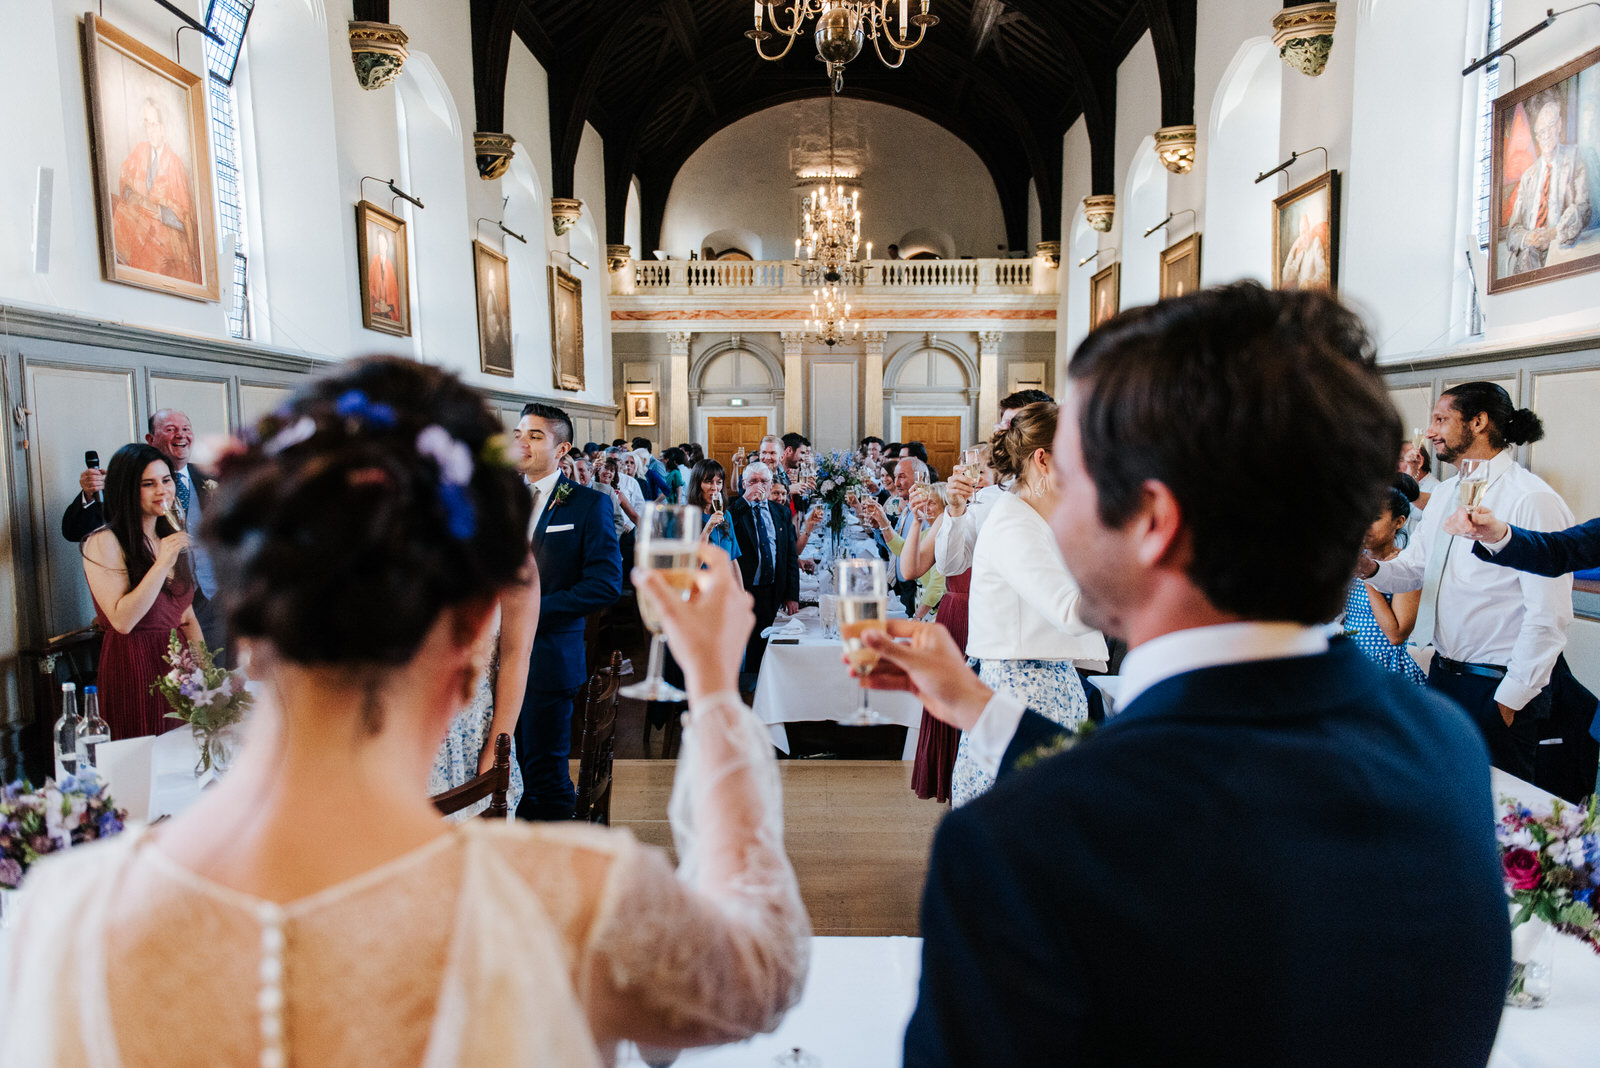 Guests raise a toast to the new bride and groom after father of 